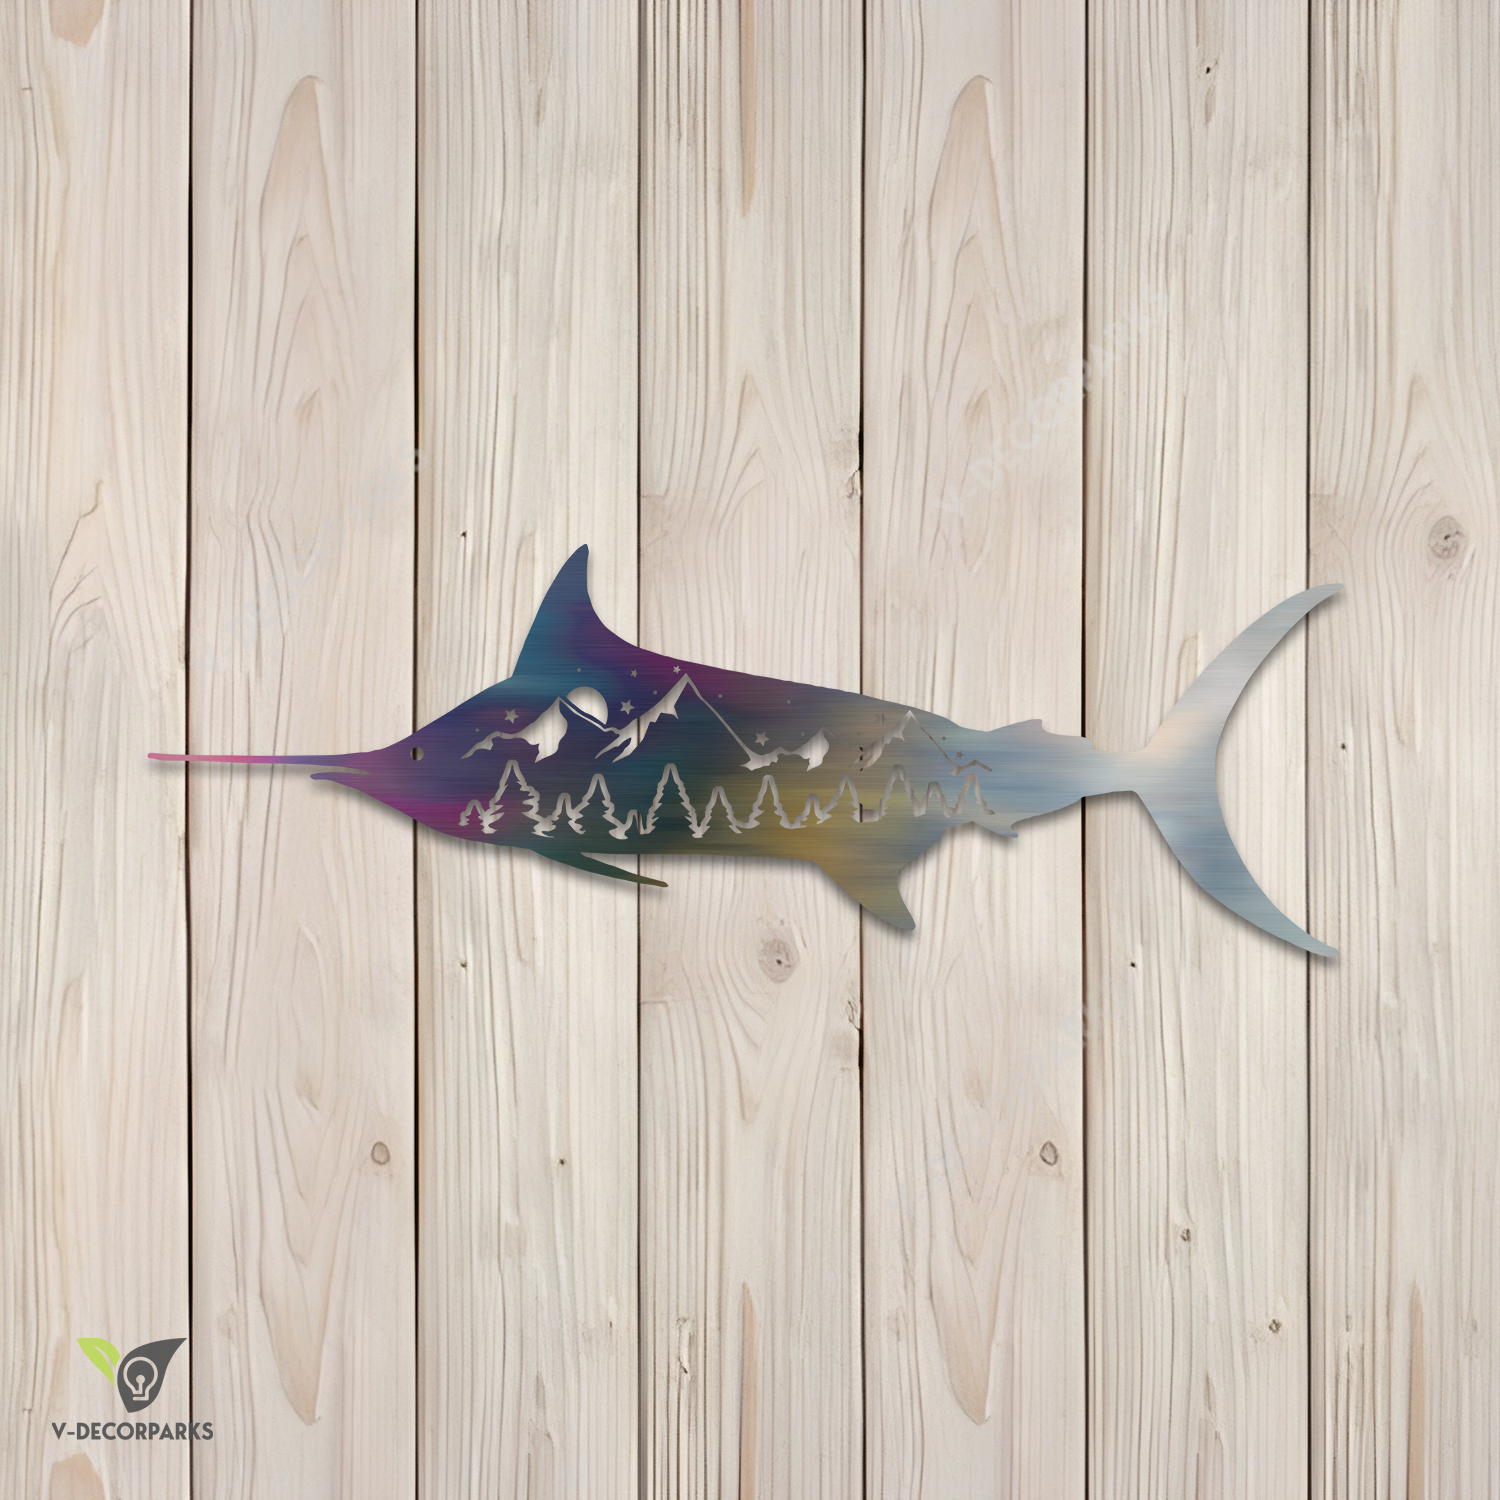 Marlin Fish Metal Wall Decoration, Marlin Decorative Accent For Beach House